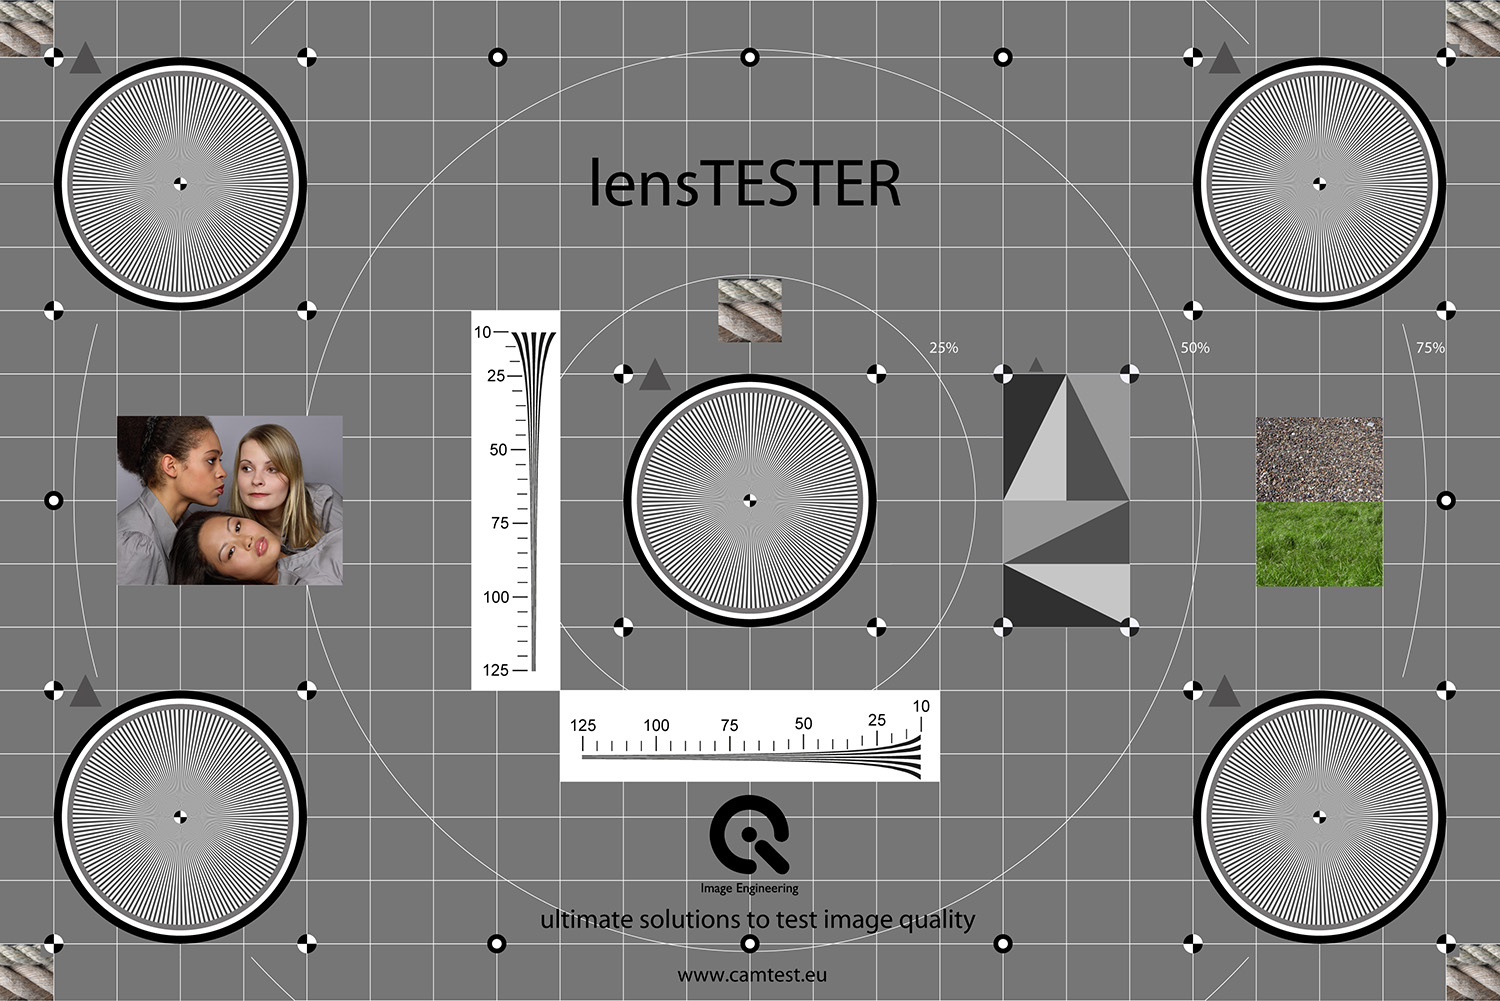 lensTESTER product image